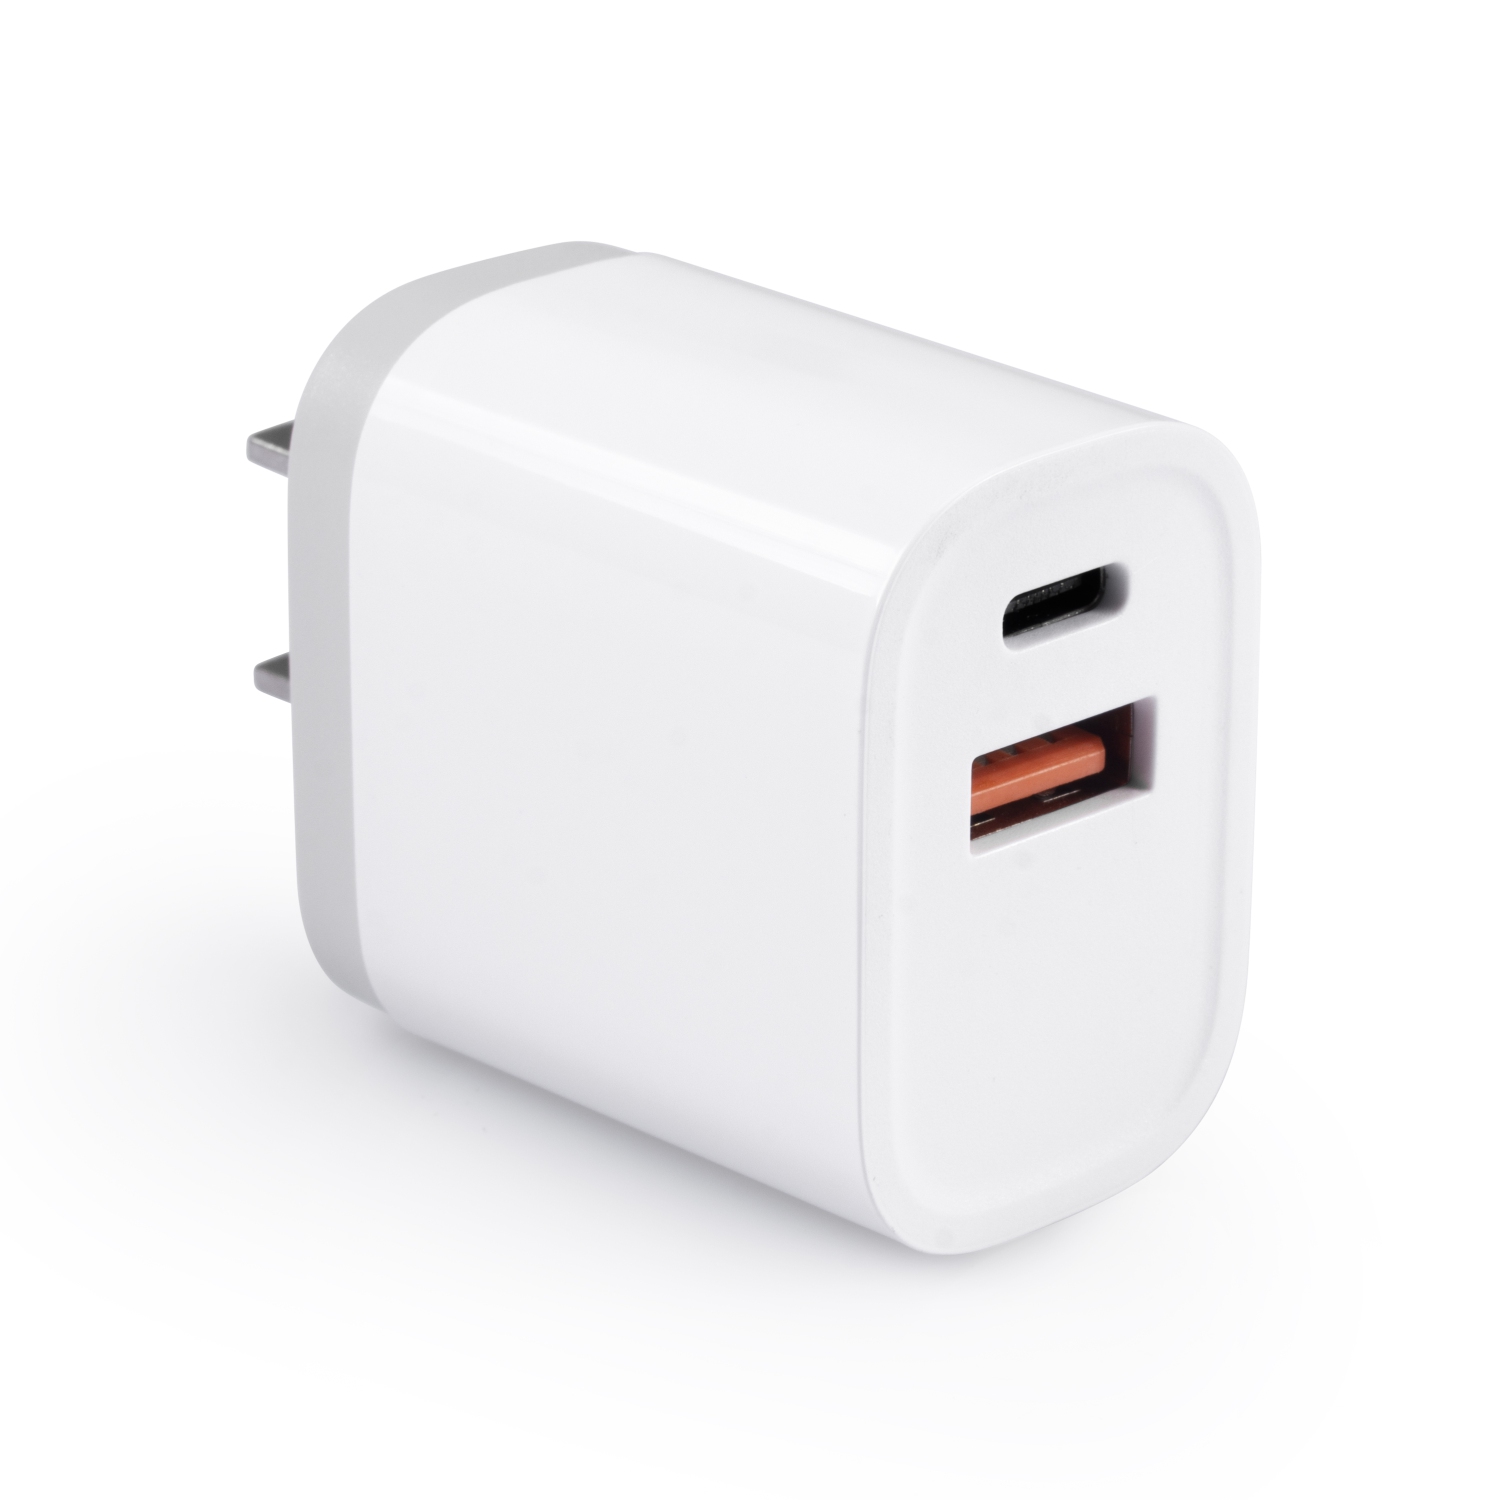 18WUSB C Wall Charger,Dual Port Fast PD+Quick Charge 3.0 Compatible with iPhone 14 13 12 11 Pro Max SE/XR/X iPad,USB C Power Adapter for iPhone 14/13 12 Pro Max 13 Mini(White)